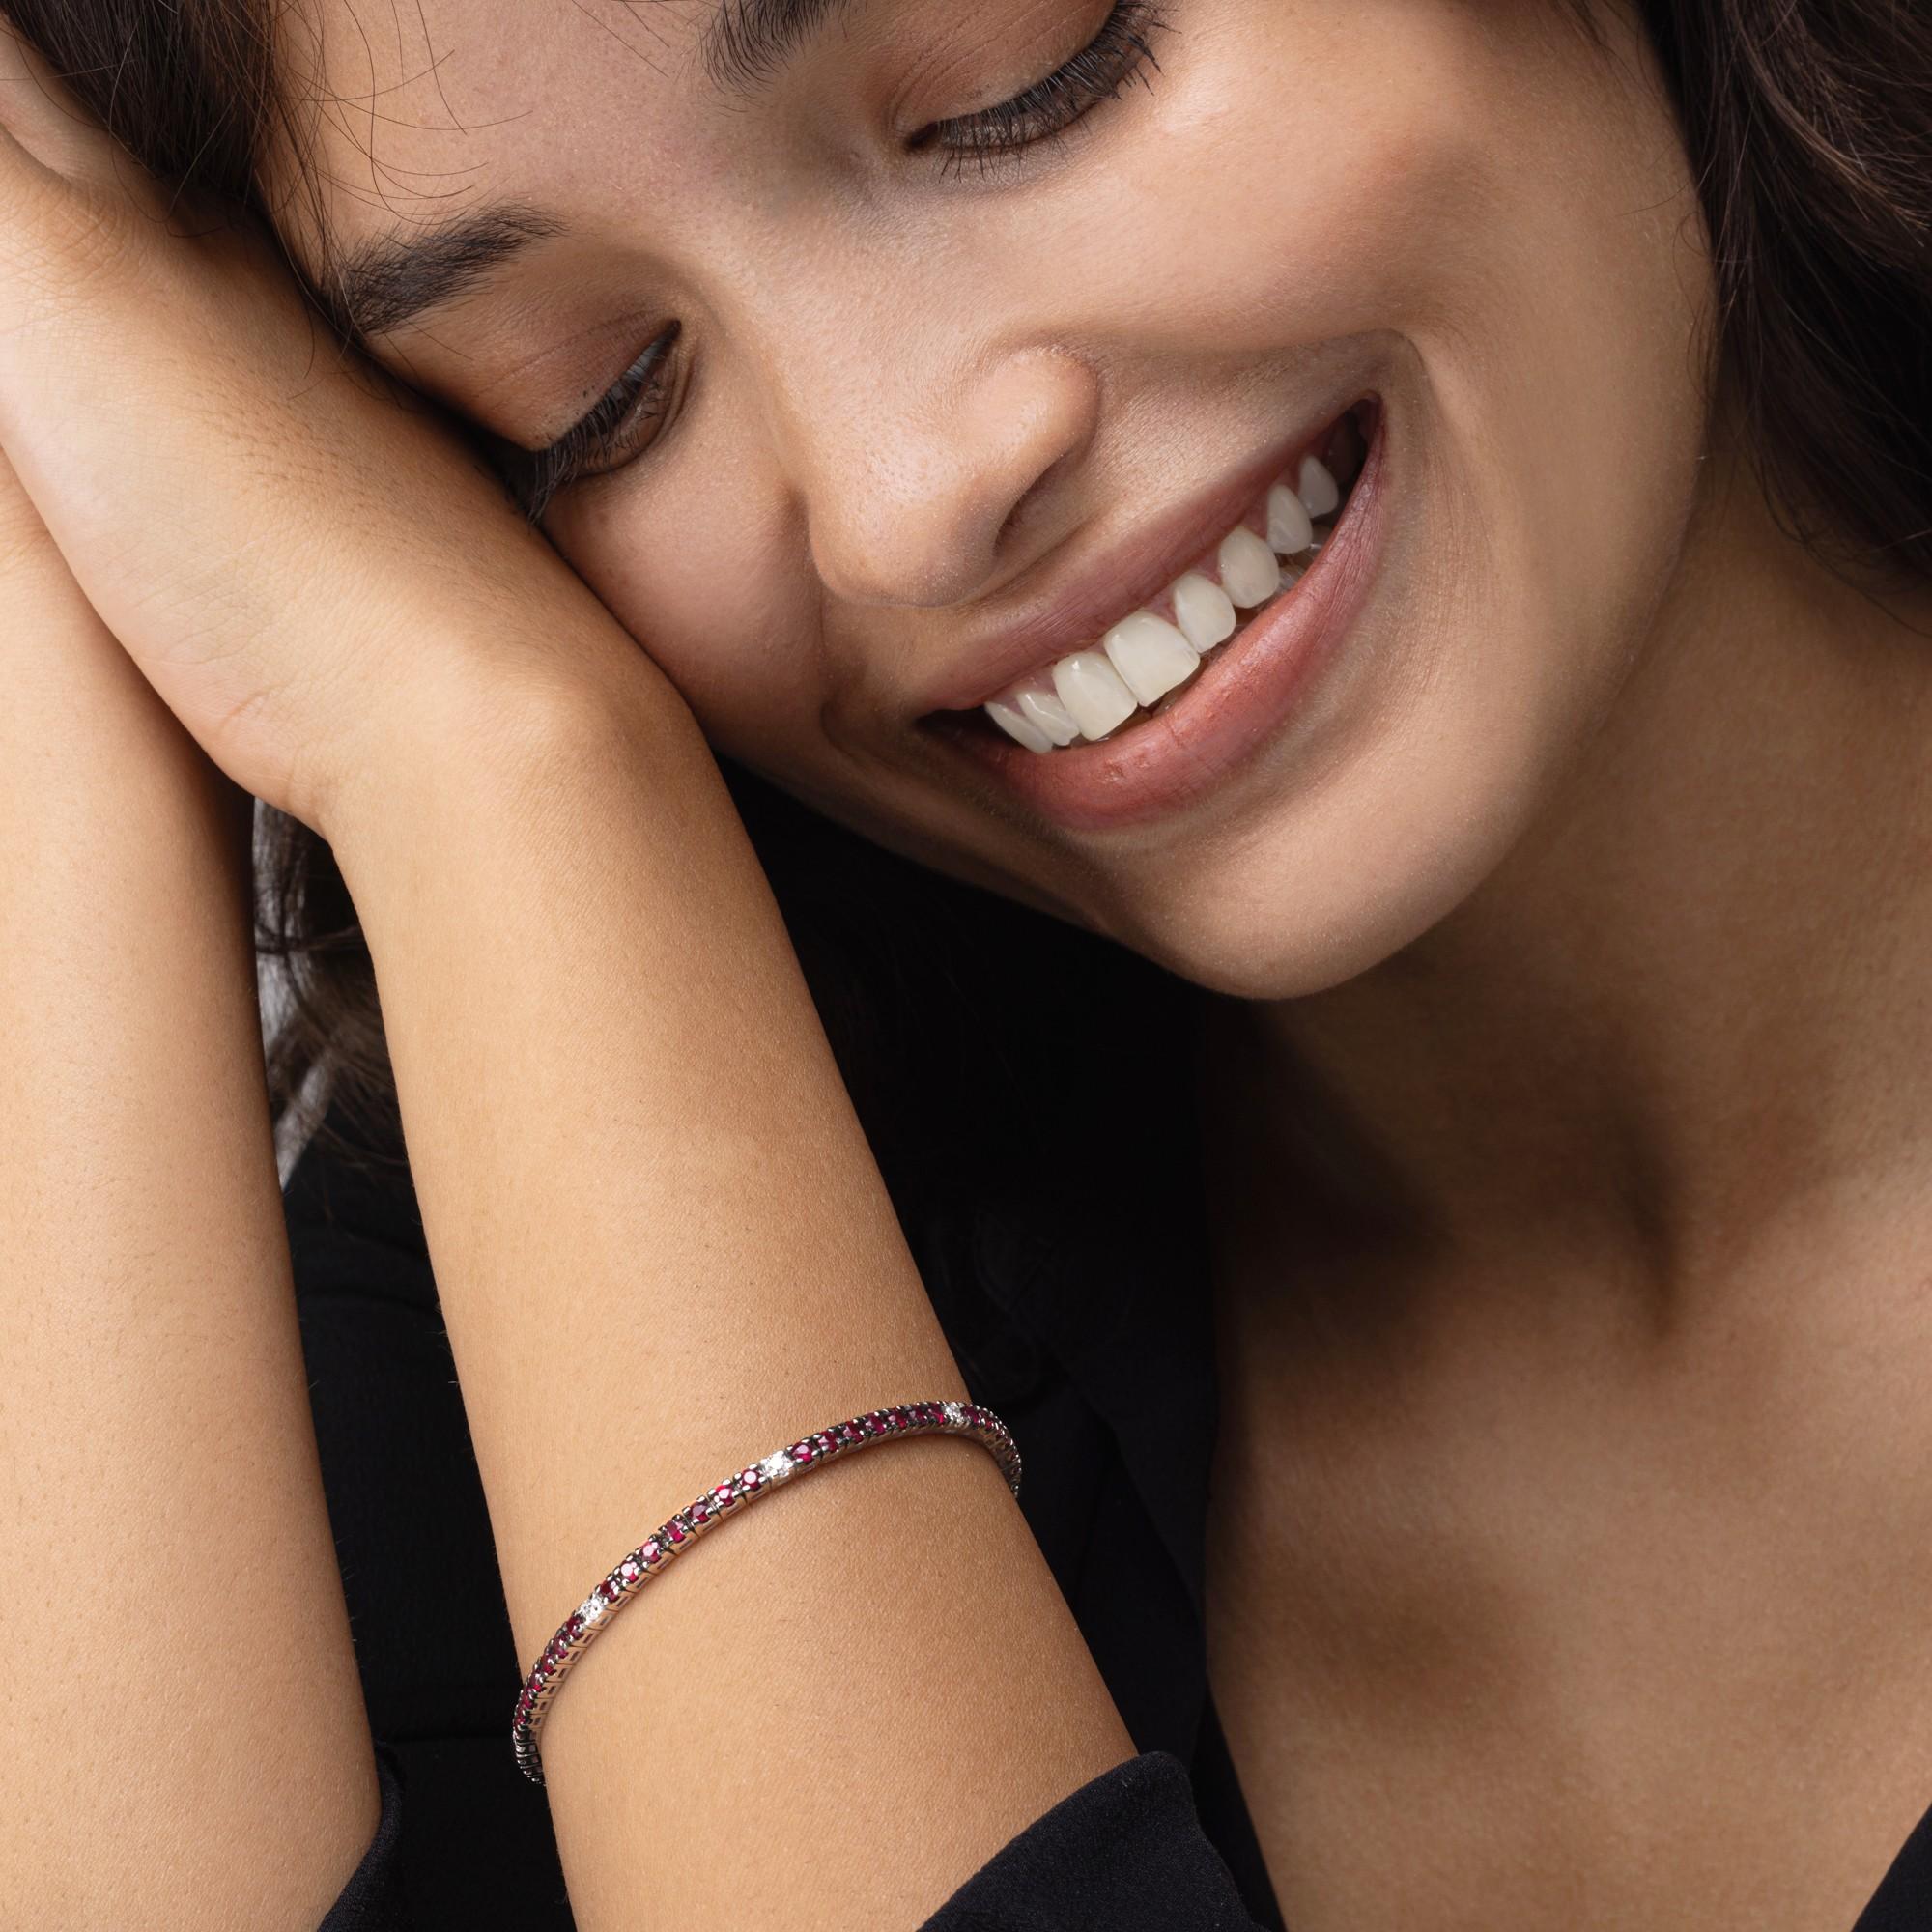 Alex Jona design collection, hand crafted in italy, 18 karat white gold tennis bracelet set with 52 rubies weighing 3.65 carats and 7 white diamonds weighing 0.37 total carats.

Alex Jona jewels stand out, not only for their special design and for